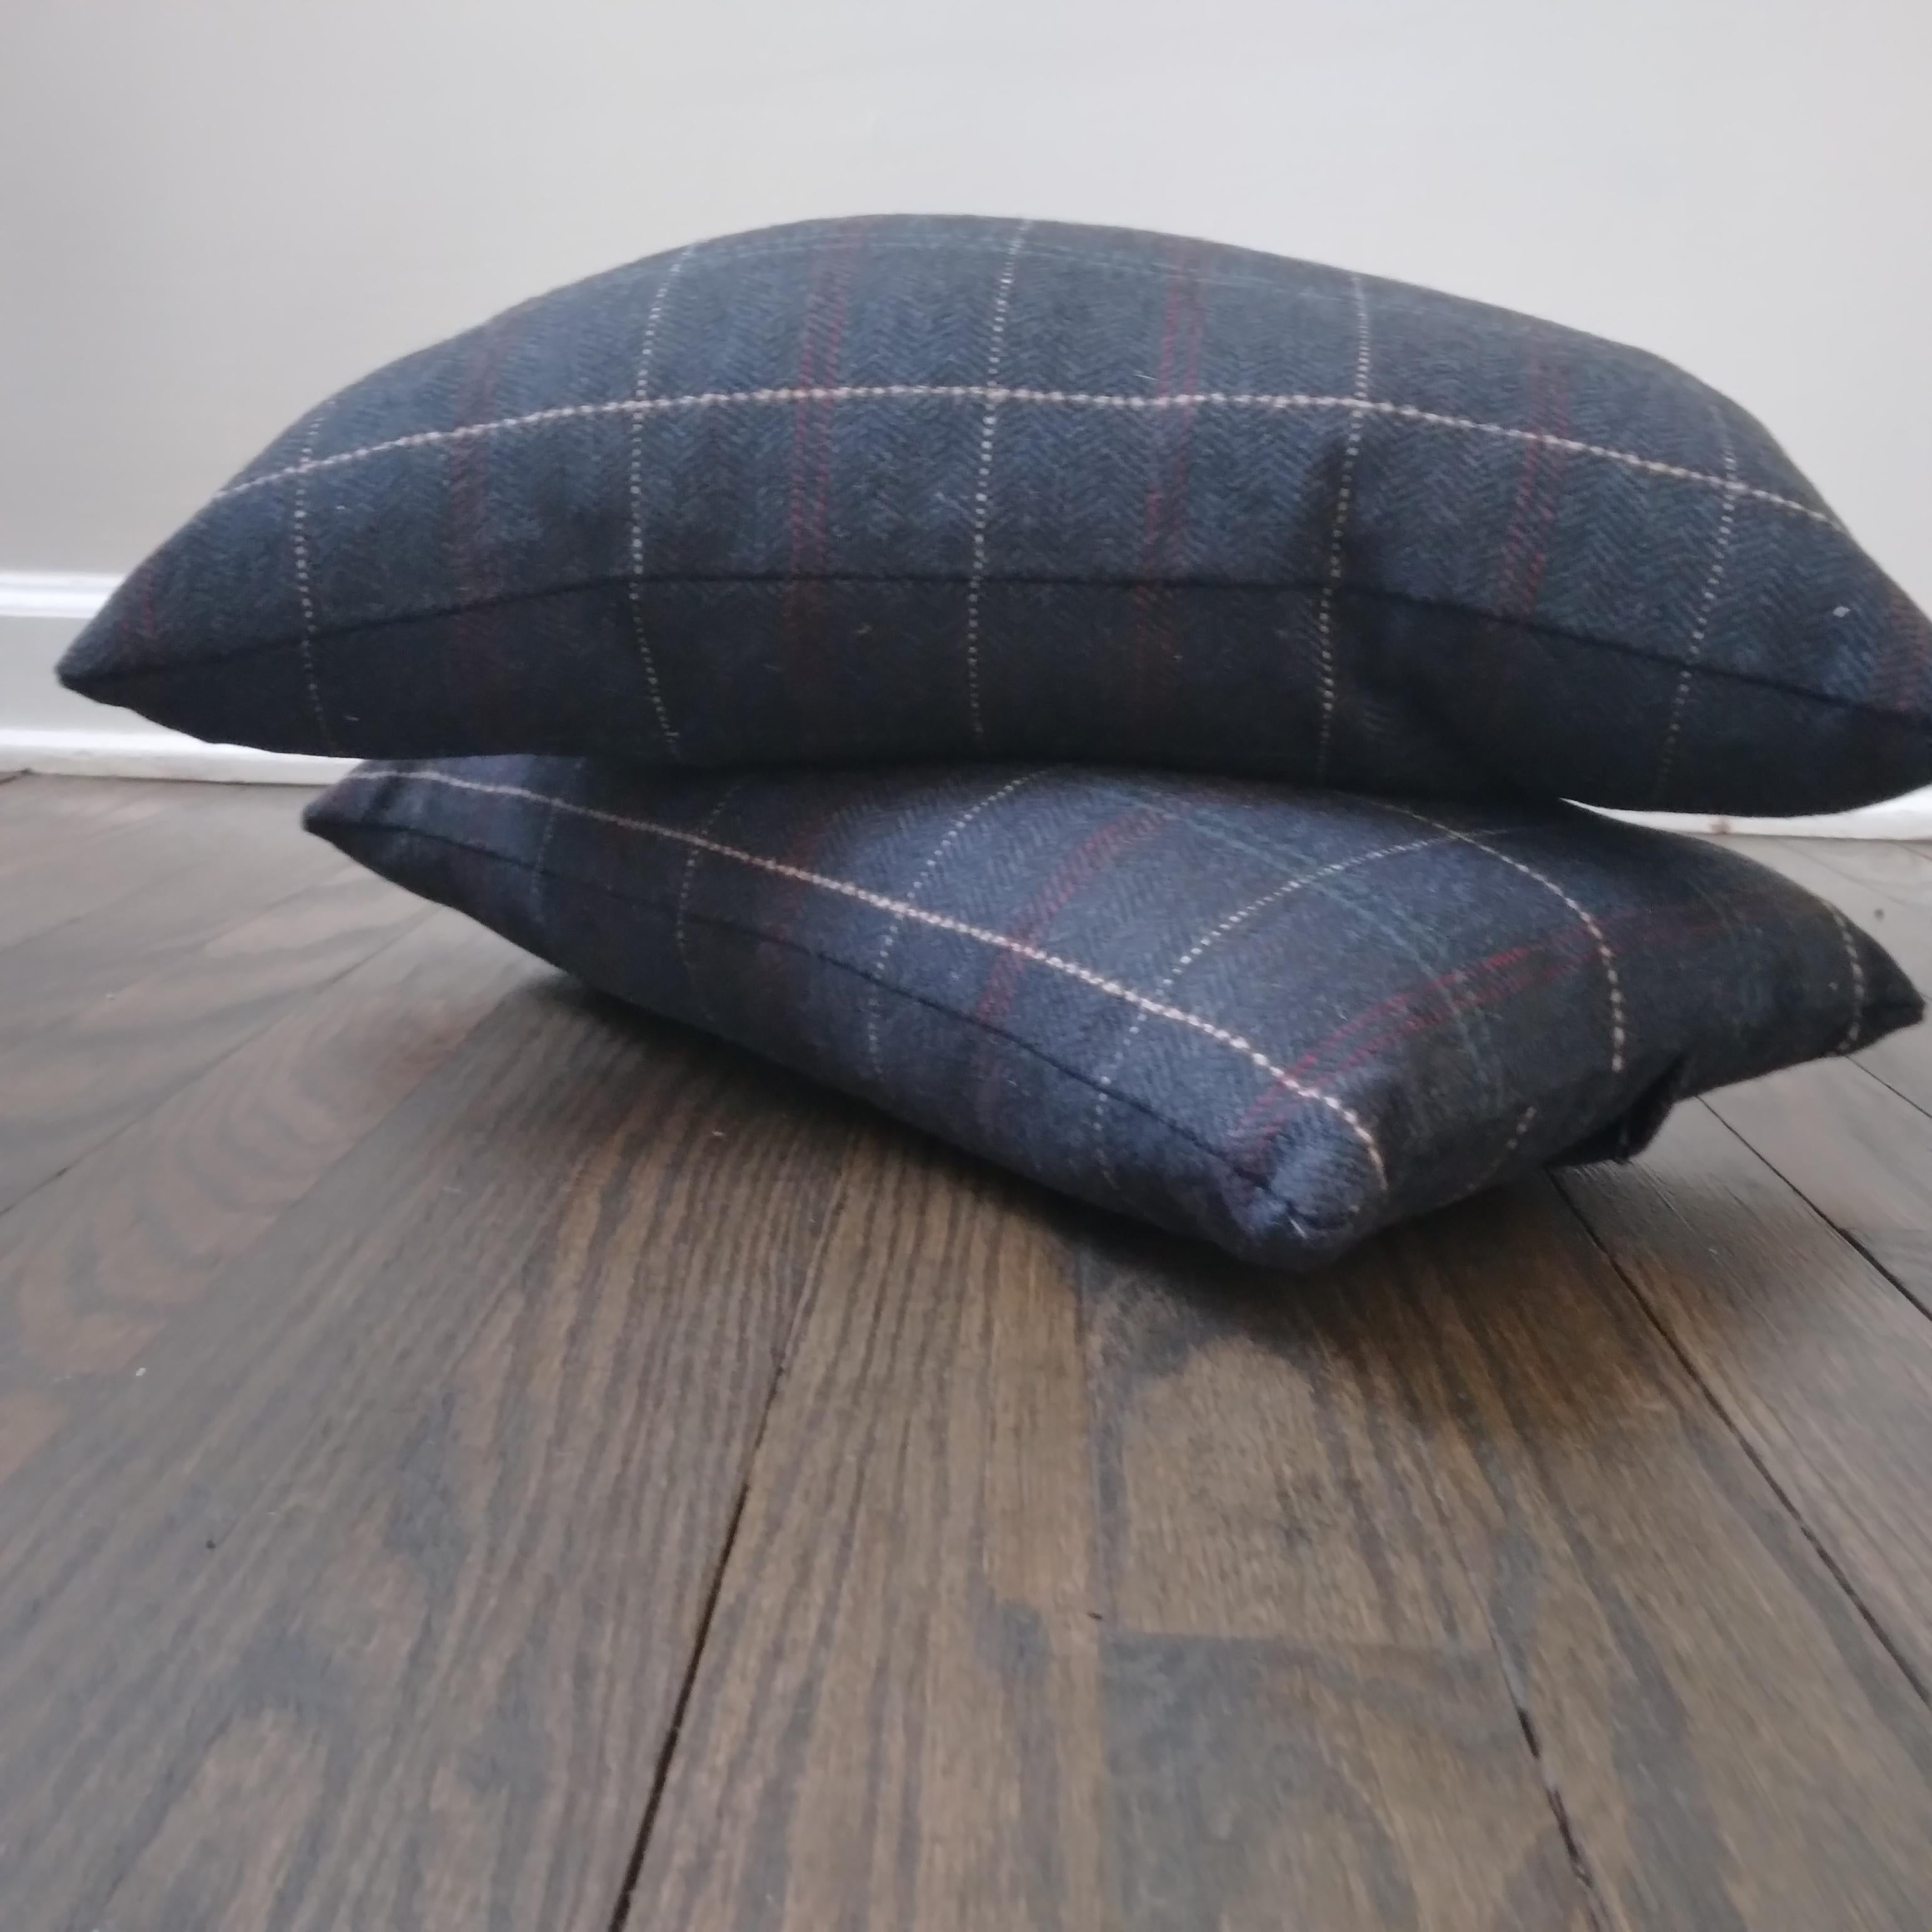 Adorably chic, these plaid lumbar pillows are the perfect way to add rich color and modish pattern to your living spaces. This classic herringbone plaid is timeless and beautiful. We love the saturated hues of the dark navy. Thin lines of brick red,